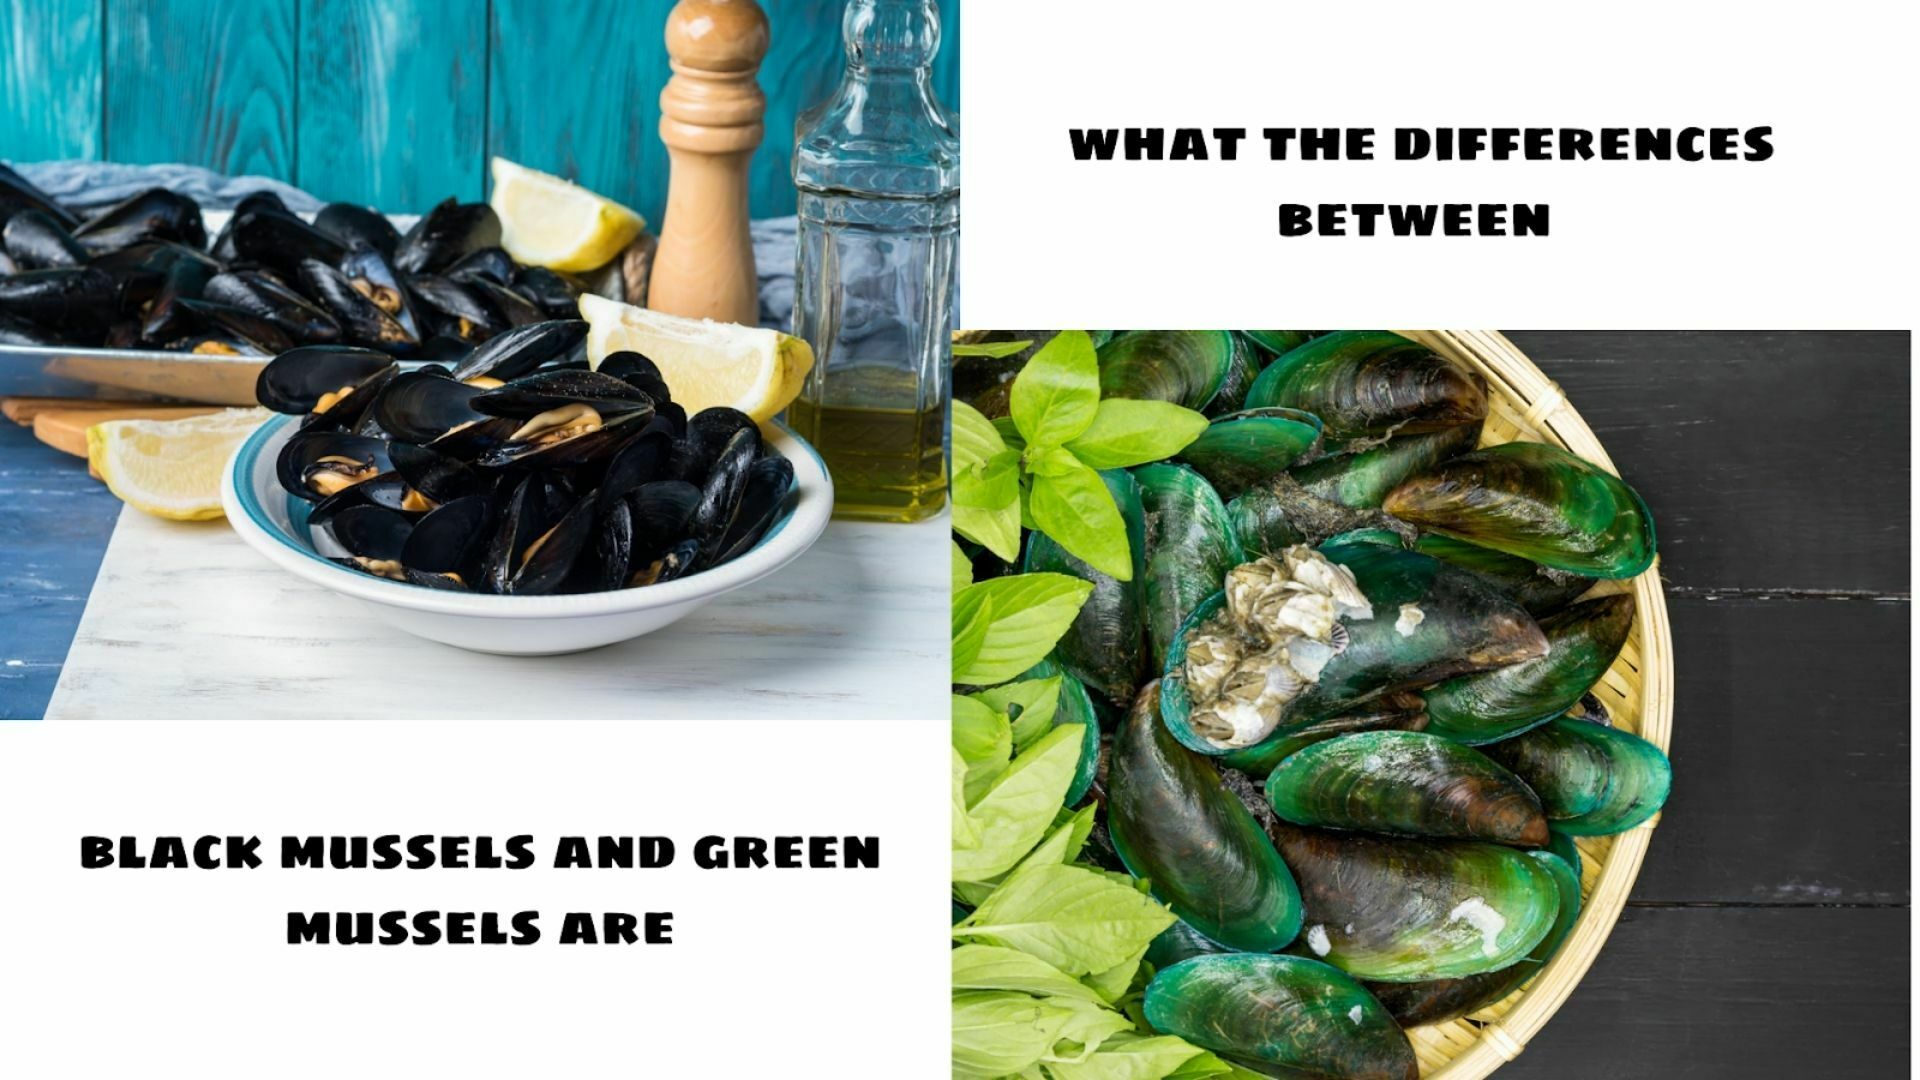 Black Mussels And Green Mussels